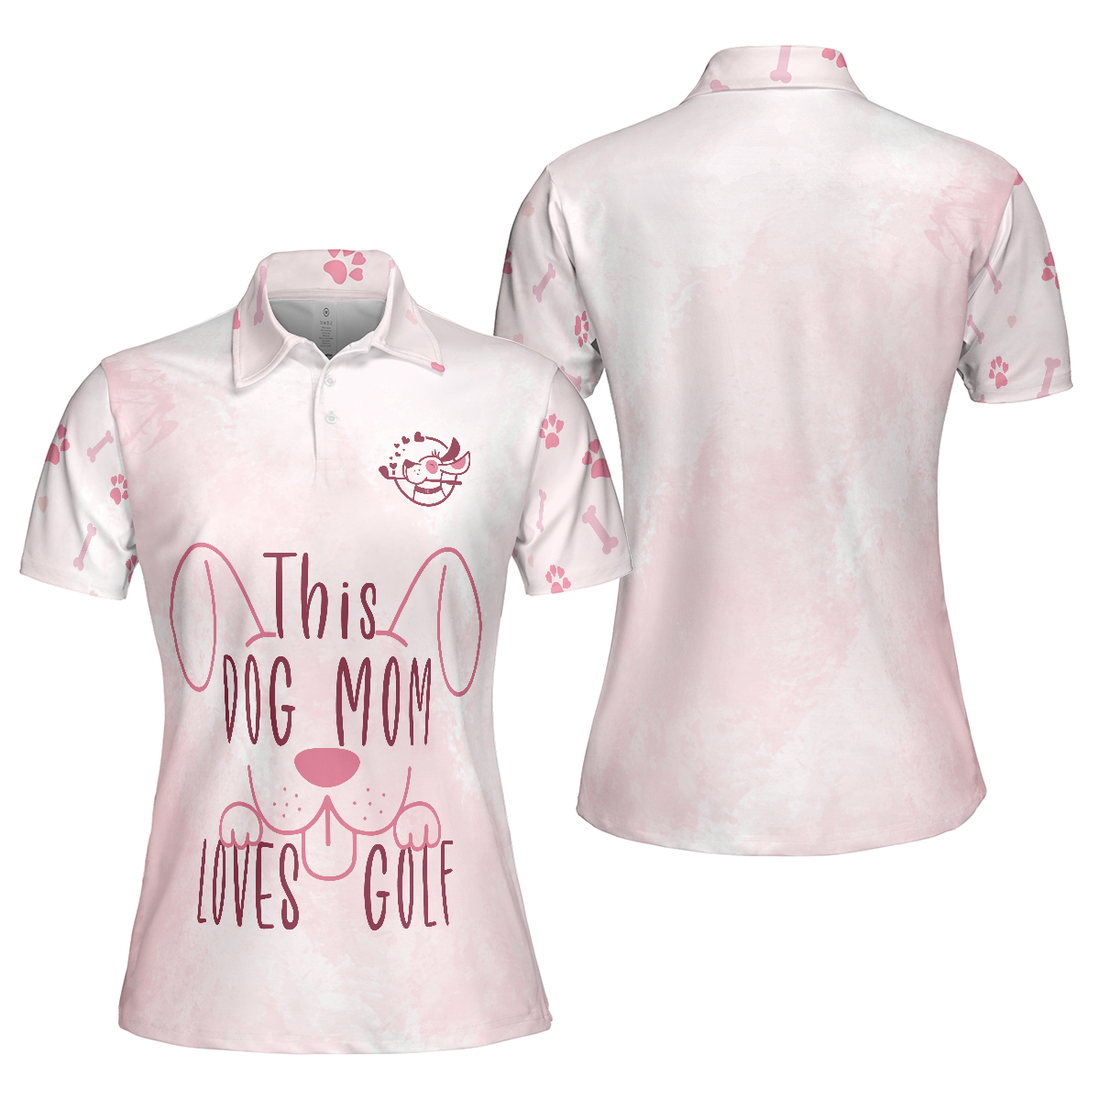 This Dog Mom Loves Golf Short Sleeve Women Polo Shirt Pink Golf Shirt For Ladies Golf Gift For Dog Lovers - 1